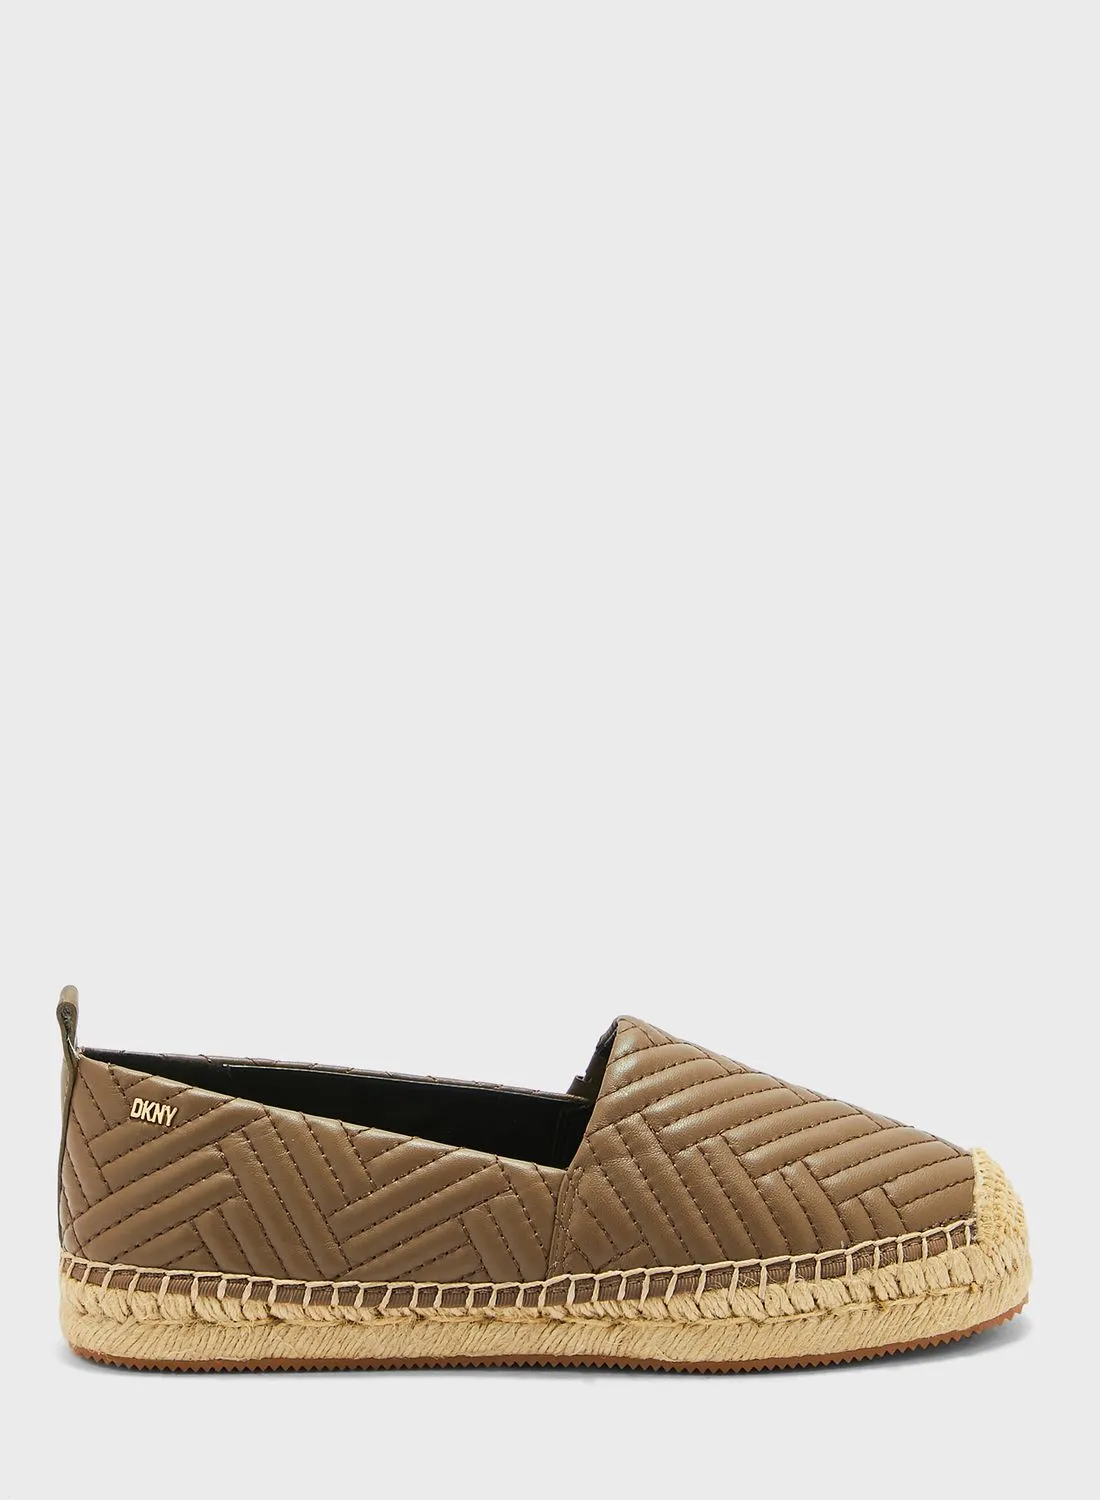 DKNY Mally Quilted Platform Espadrilles